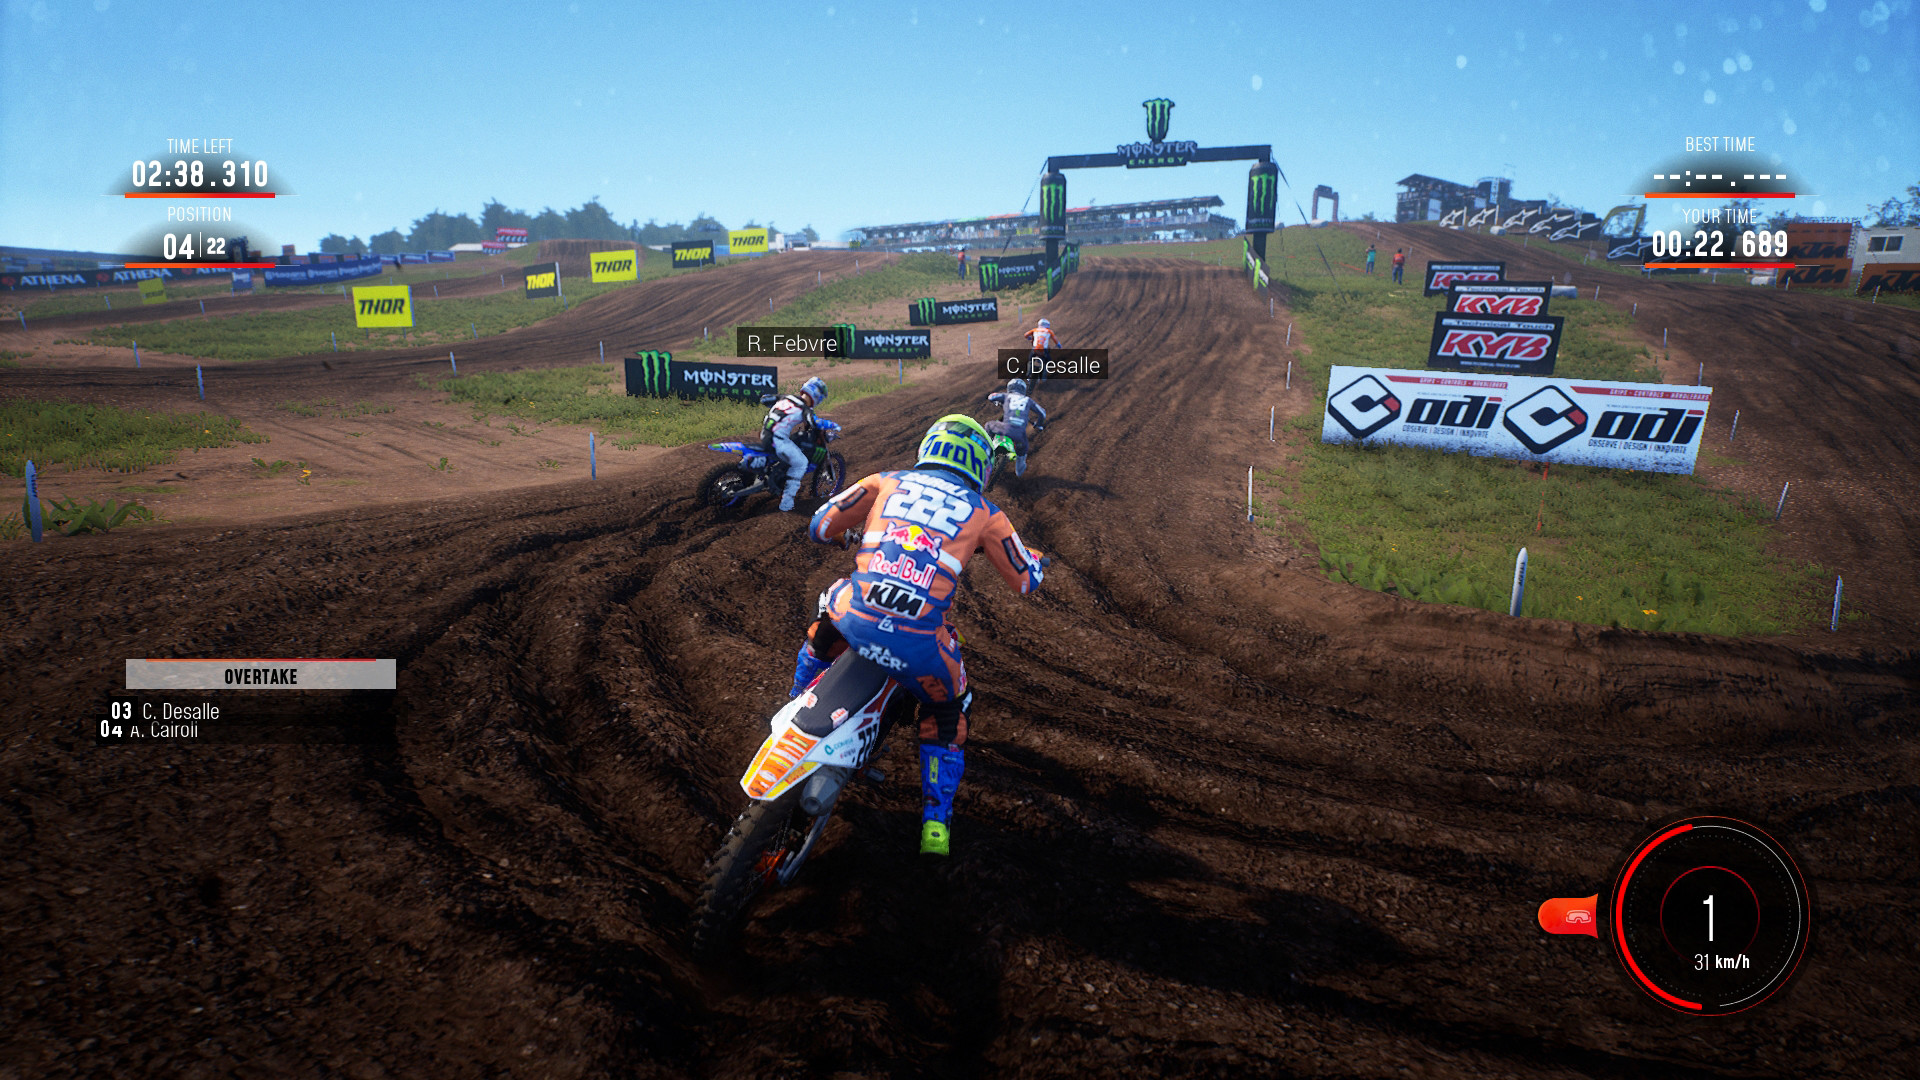 Find the best computers for MXGP 2019 - The Official Motocross Videogame